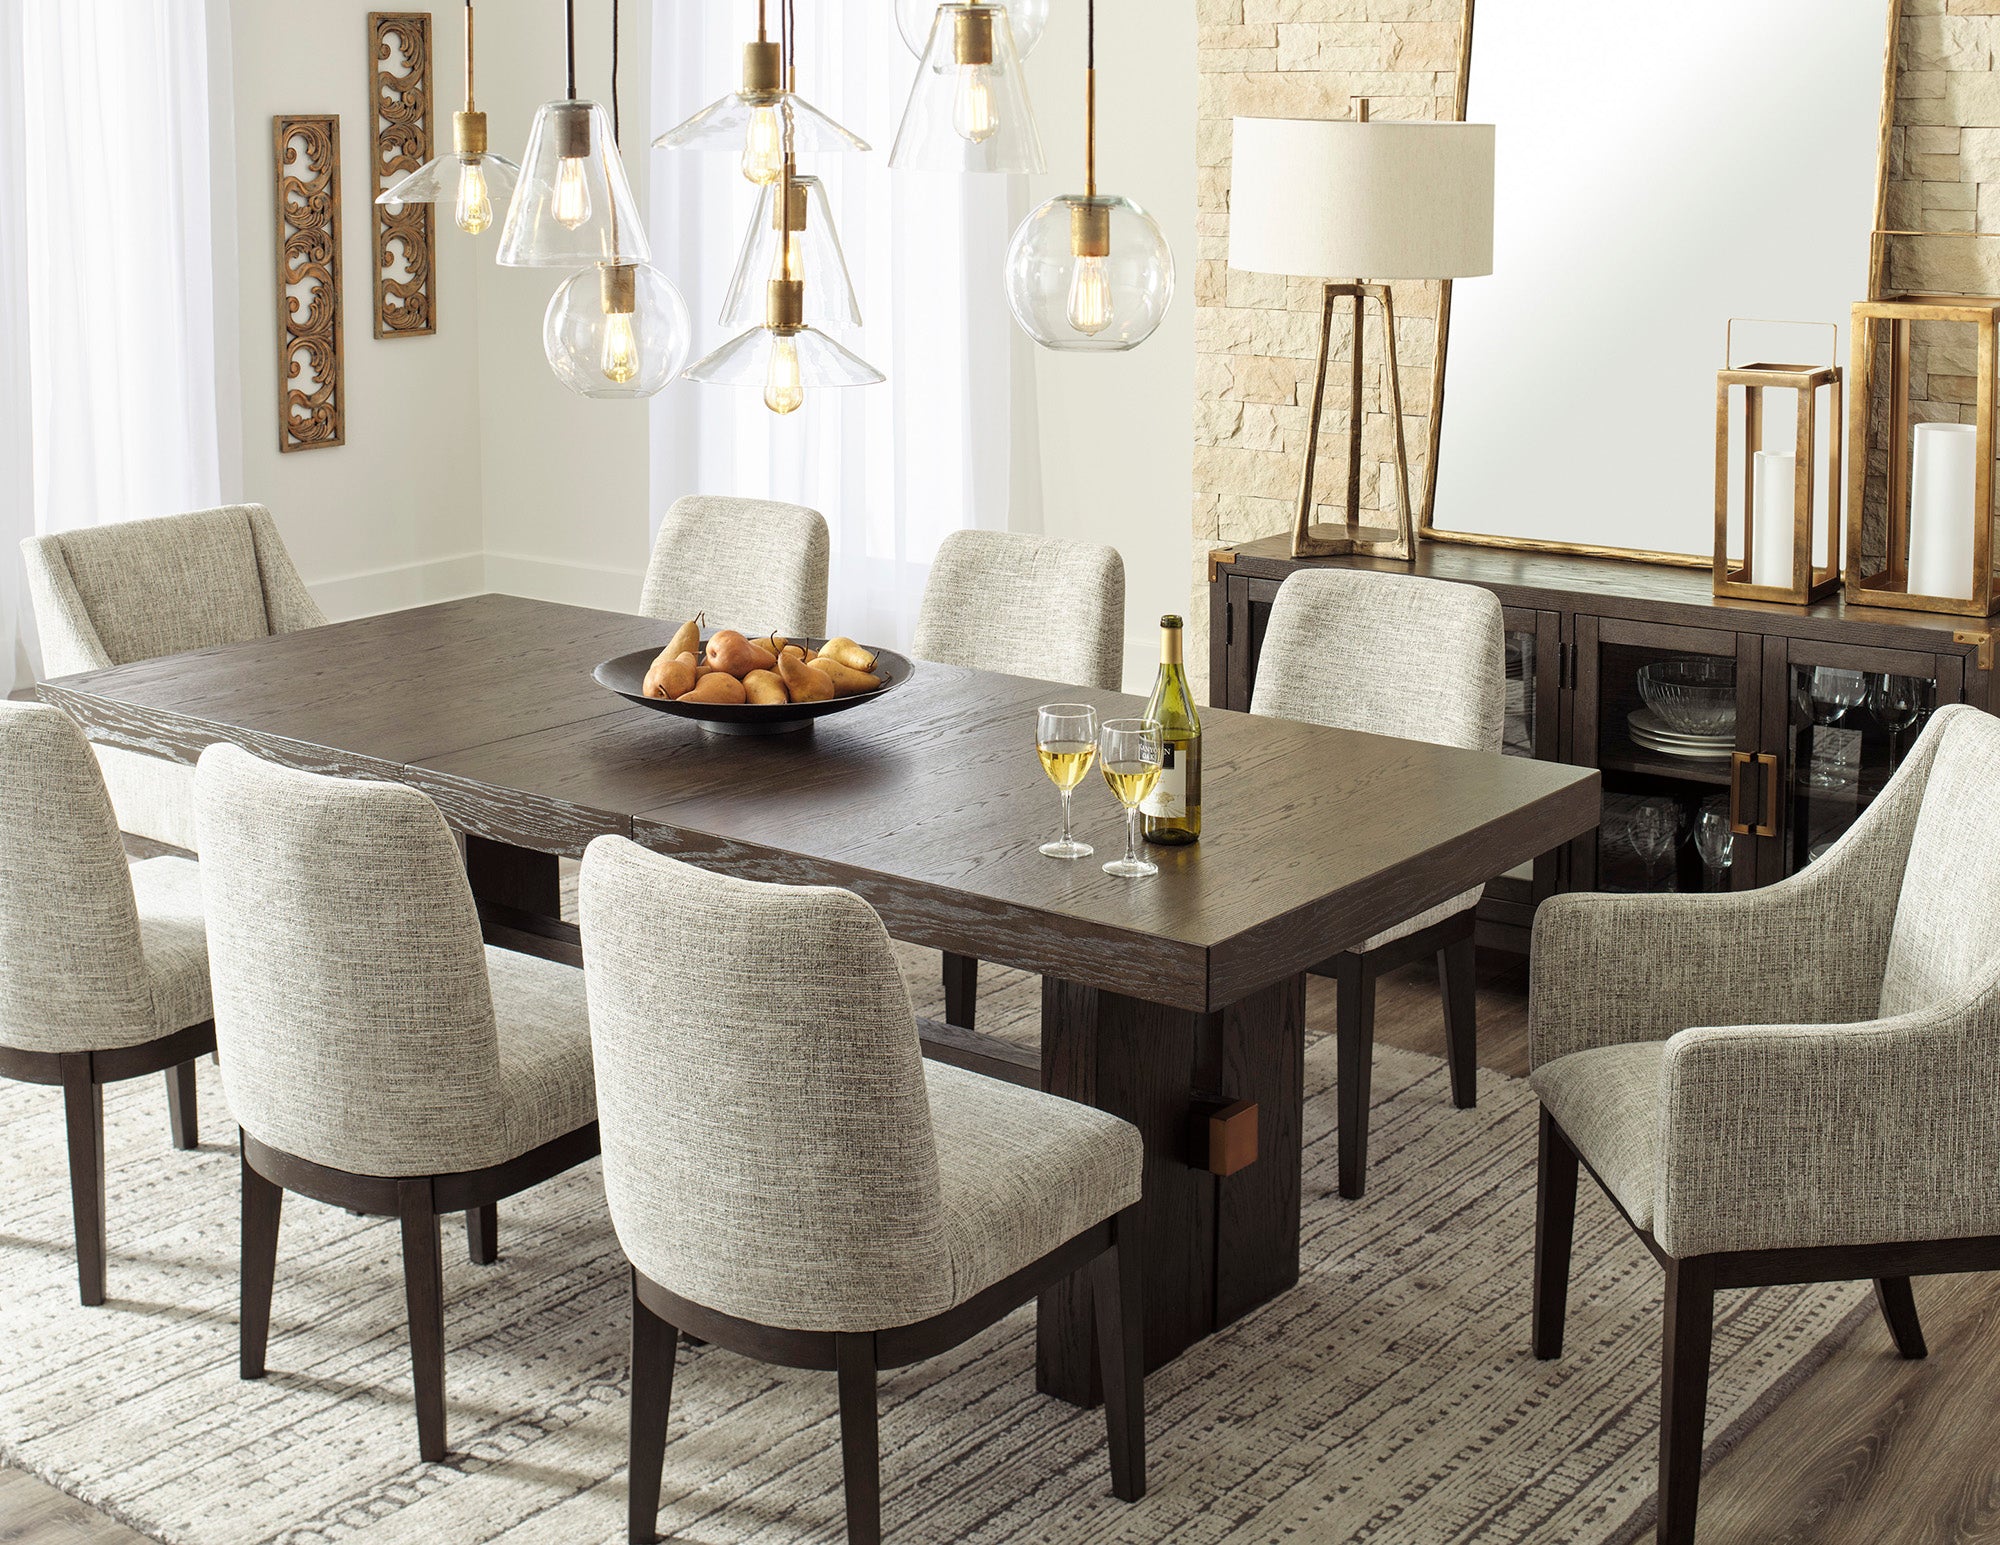 Burkhaus Extendable Dining Table and 6 Chairs